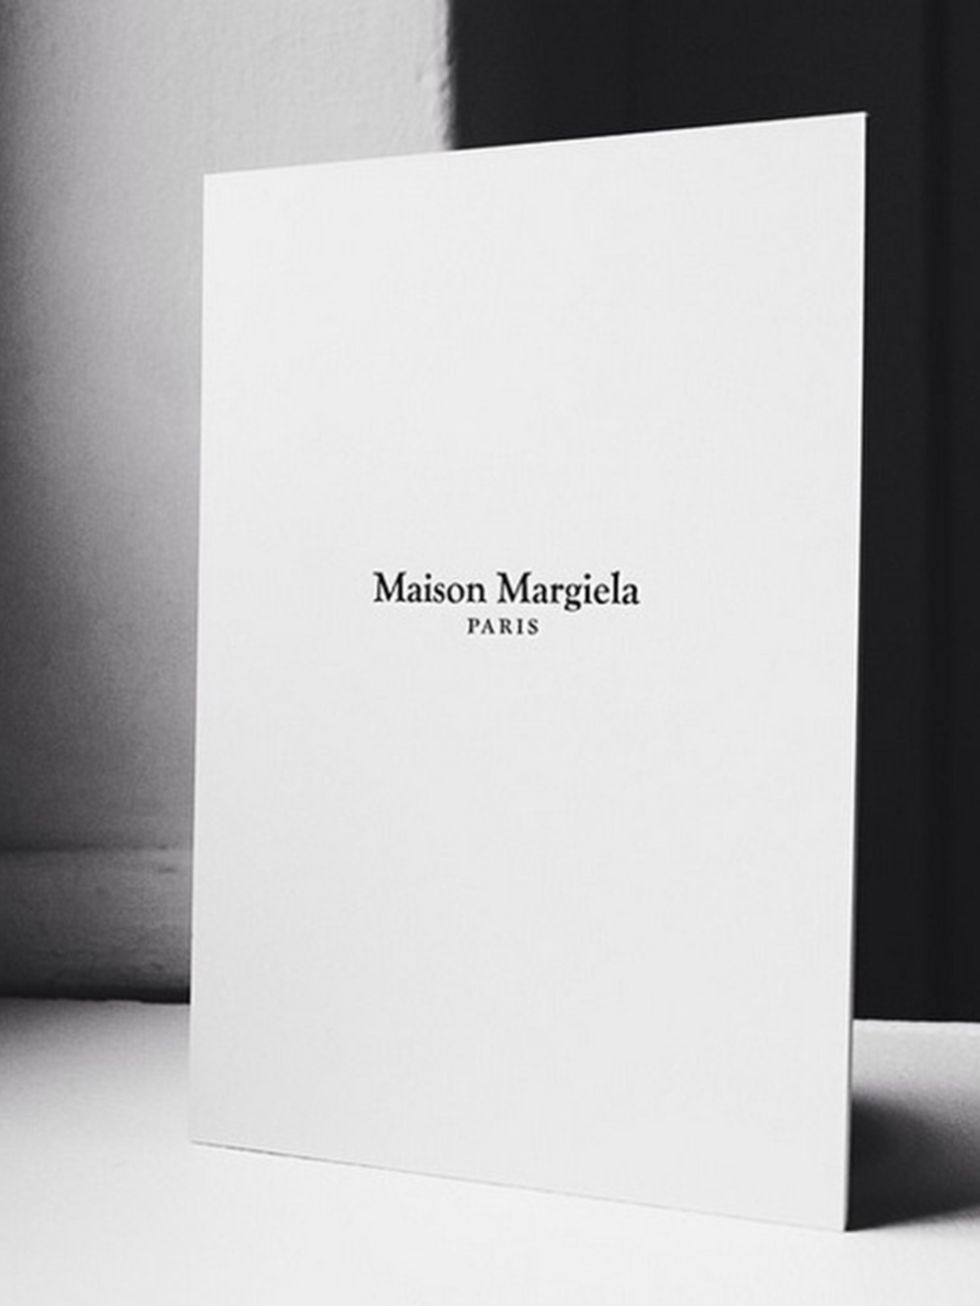 <p>Maison Margiela (@maisonmargiela)</p>

<p>&#39;In anticipation for John Galliano&rsquo;s first Maison Margiela ready-to-wear collection, we invite you to take part in this Friday&rsquo;s reveal right here on Instagram. #MargielaAW15 #MaisonMargiela #pf